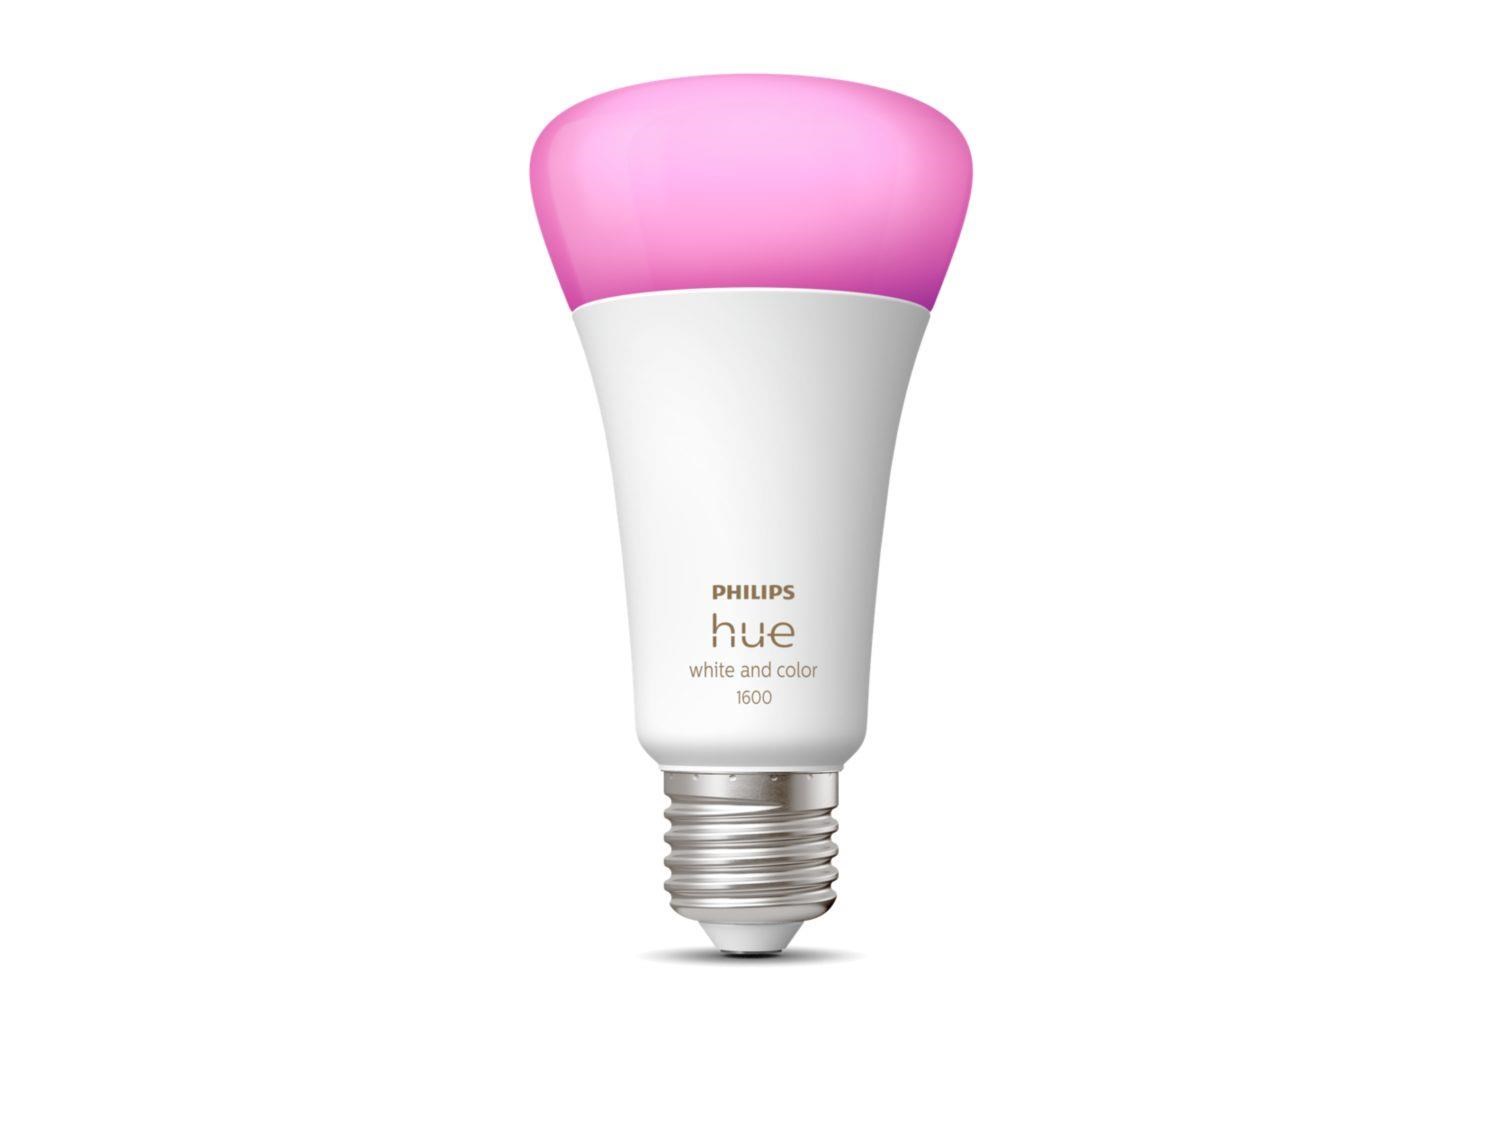 PHILIPS Hue White and Color Ambiance 15W 1600 E270 